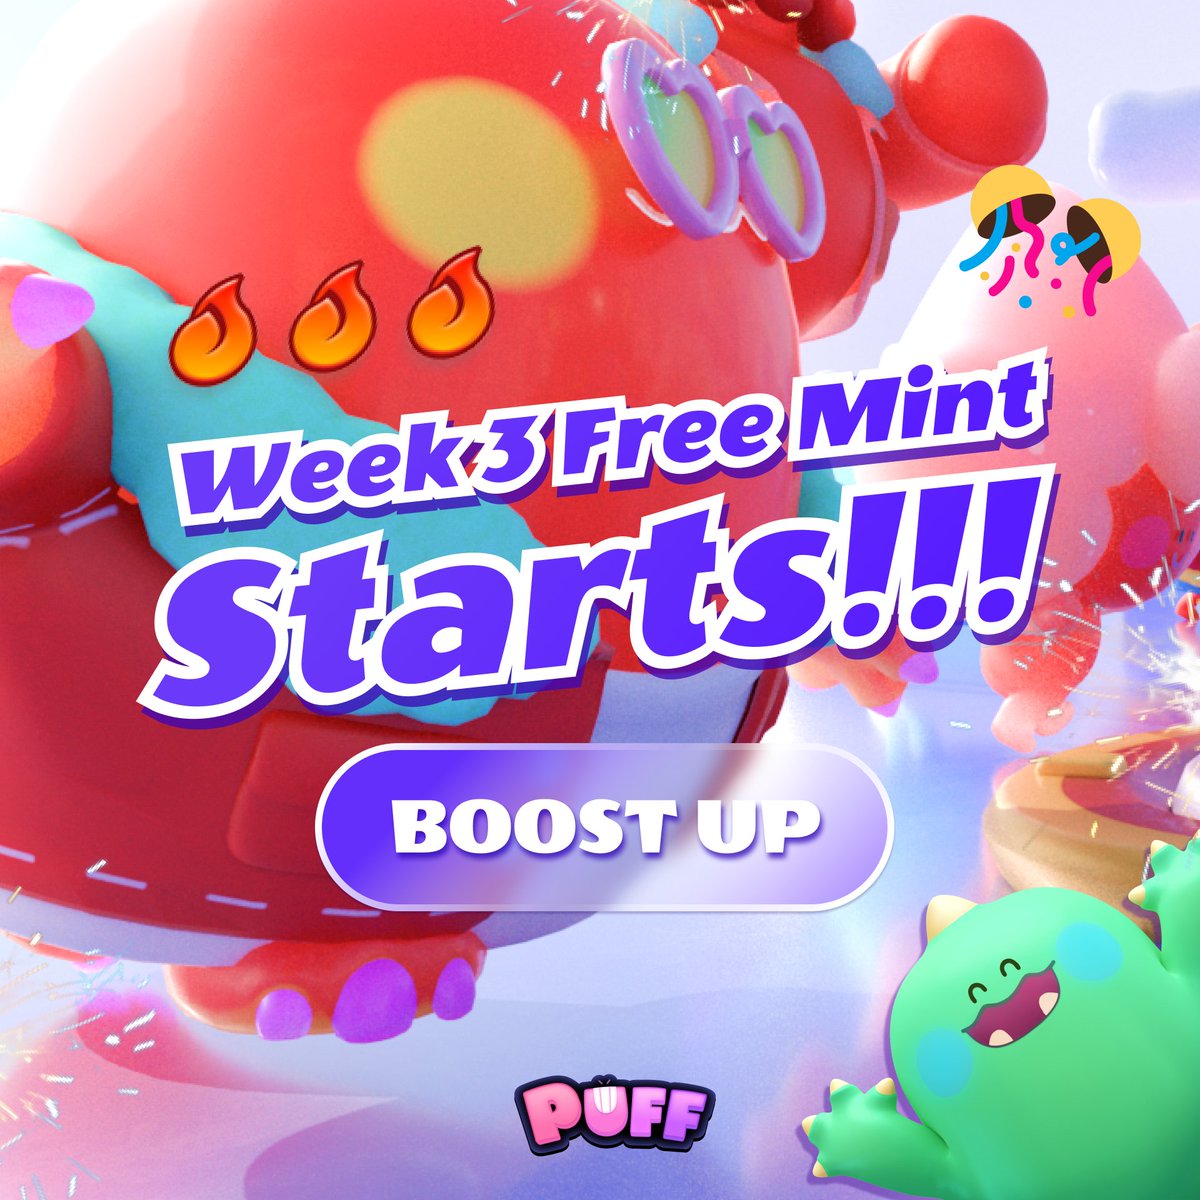 How is your luck on the #PuffGenesis Lottery this round? 🤩 Mint #PuffTicket for the 3rd Week to get Genesis w/ a BOOST of 80% possibility & #Halloween event! Mint 👉🏻 puffverse.pro/mint Party 👉🏻 puffverse.me/halloween More surprises for Genesis holders next month! 🎊